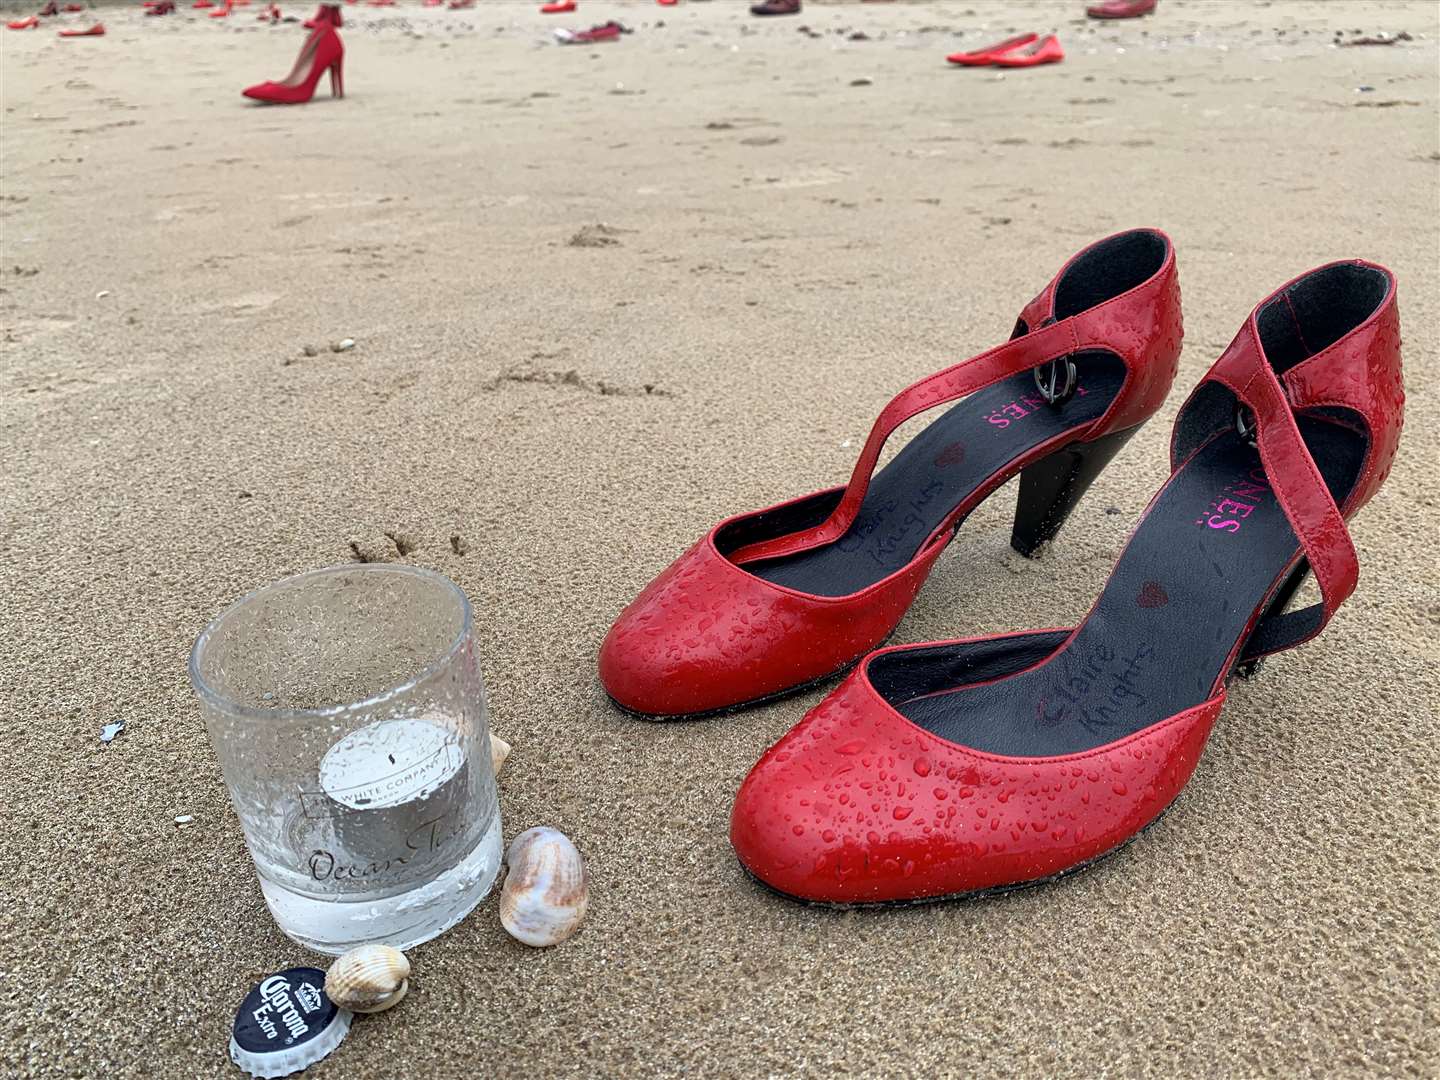 A pair of shoes were laid out for Claire Knights in Birchington